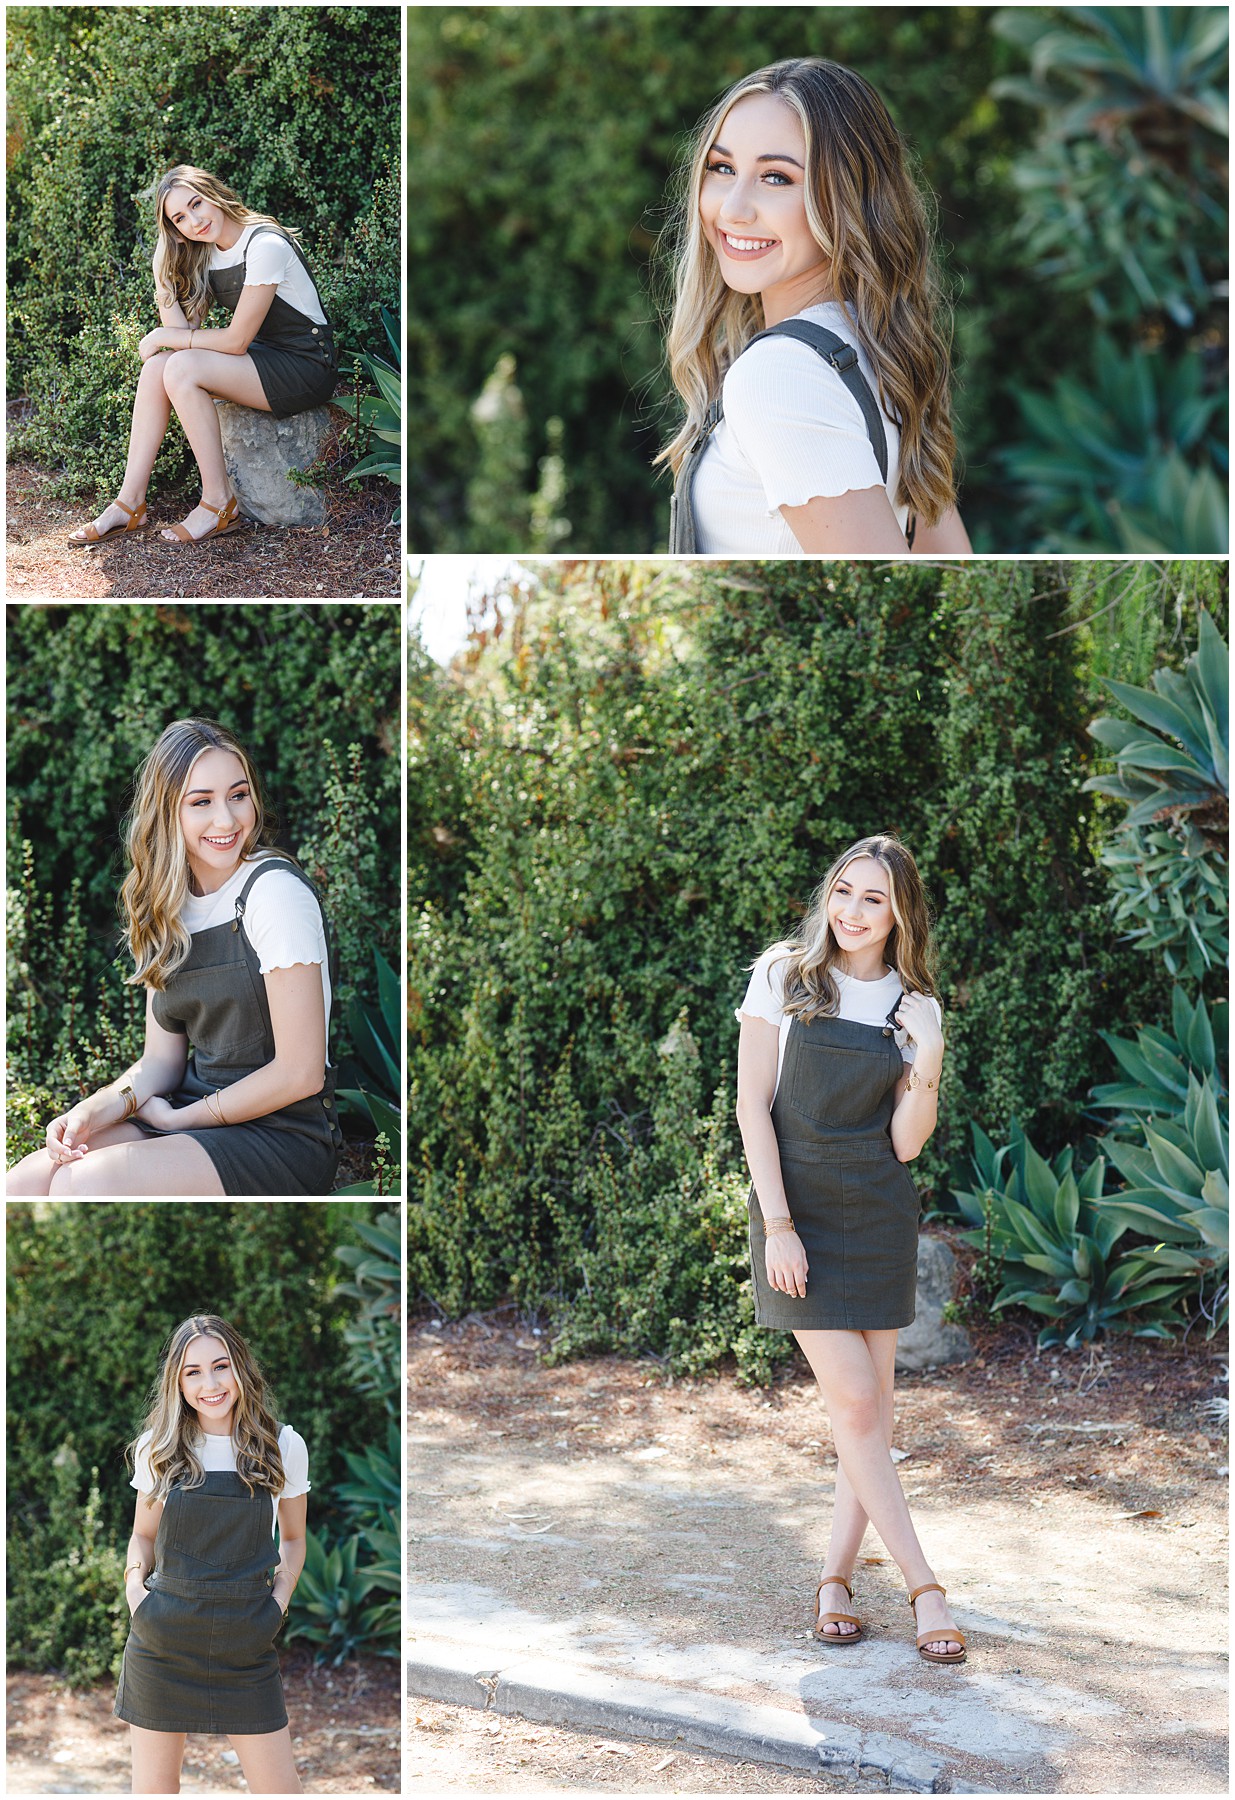 nature background in filmore california by tara rochelle professional photographer